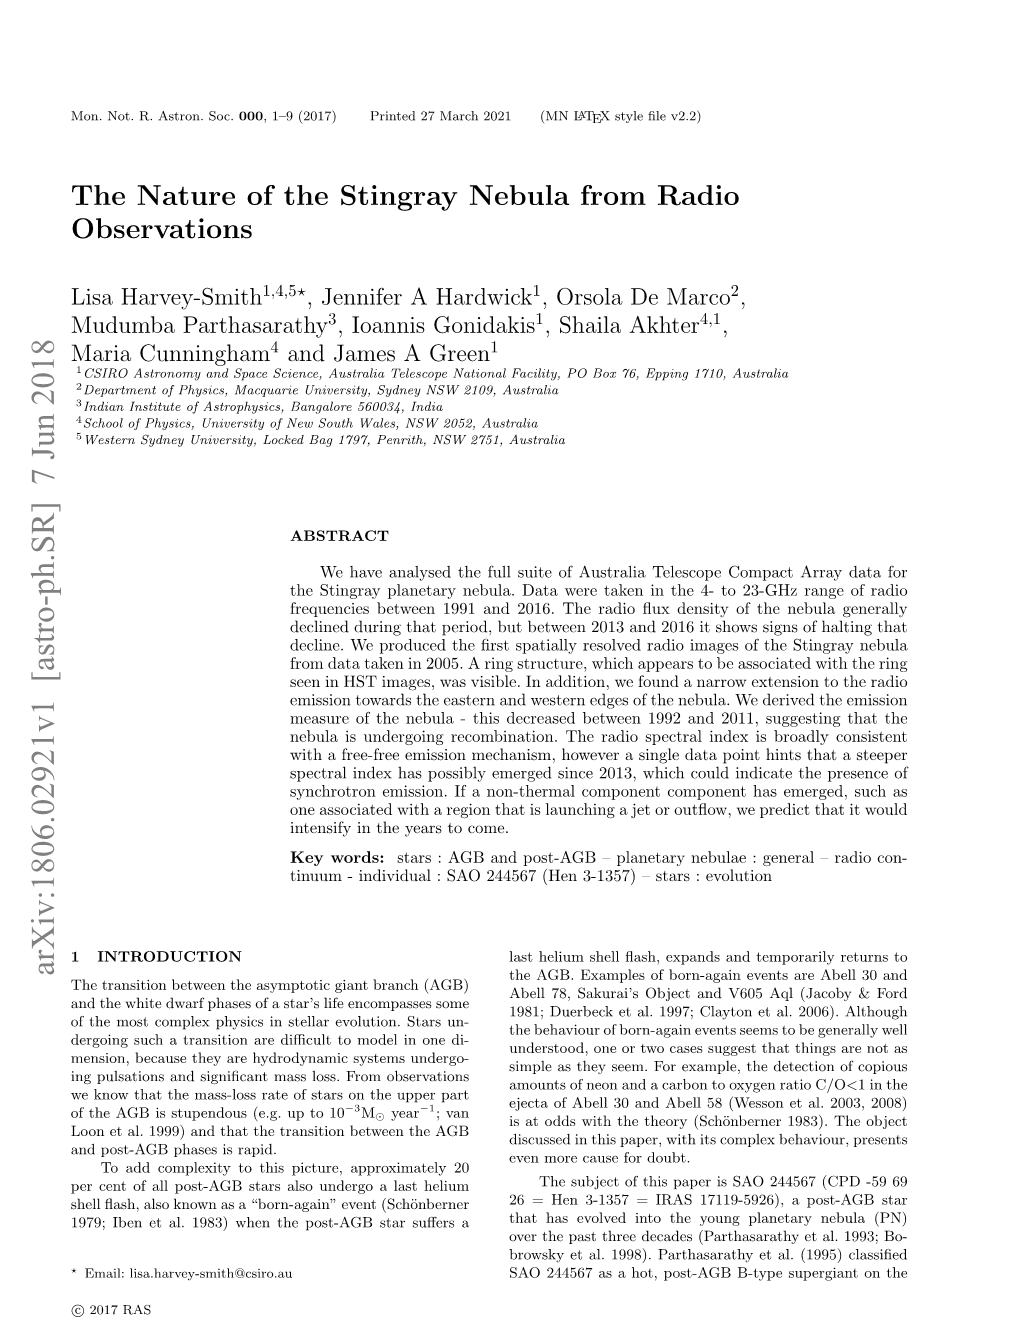 The Nature of the Stingray Nebula from Radio Observations